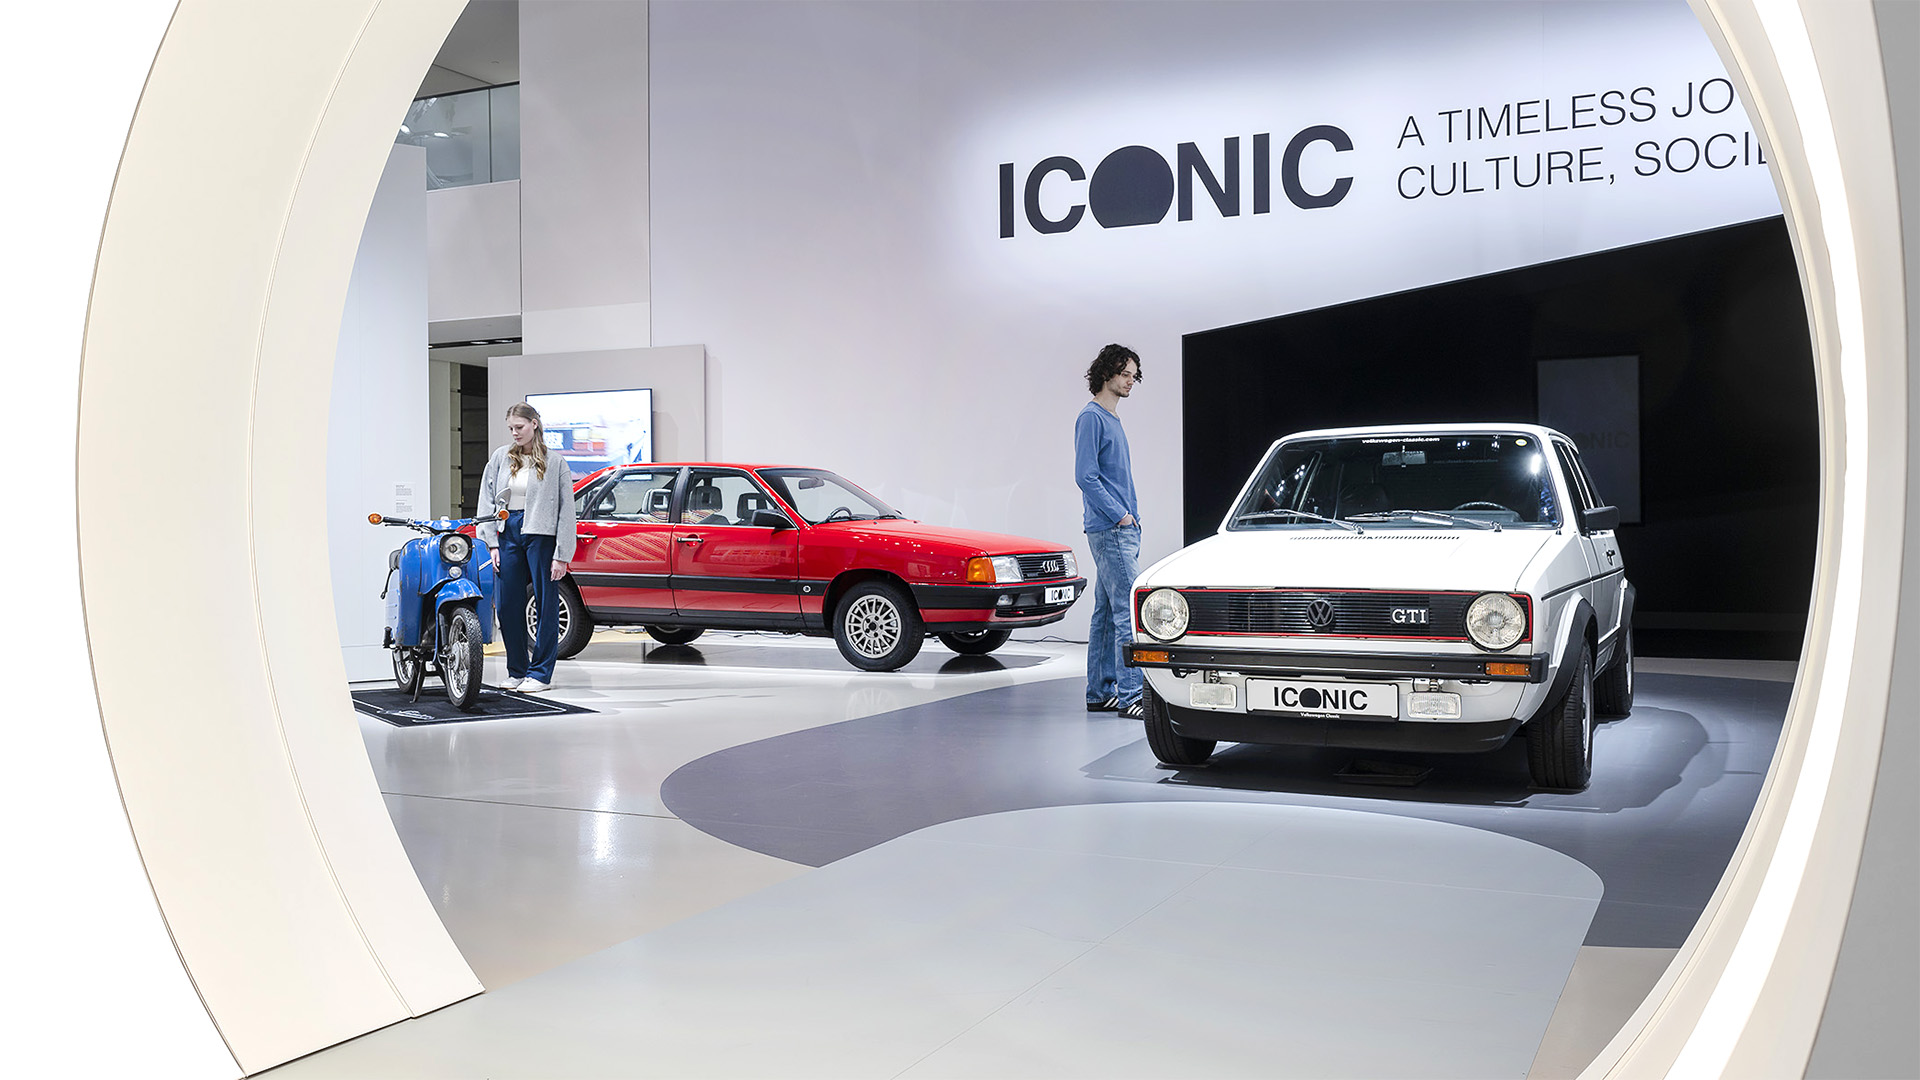 ICONIC A TIMELESS JOURNEY OFCULTURE, SOCIETY AND MOBILITY